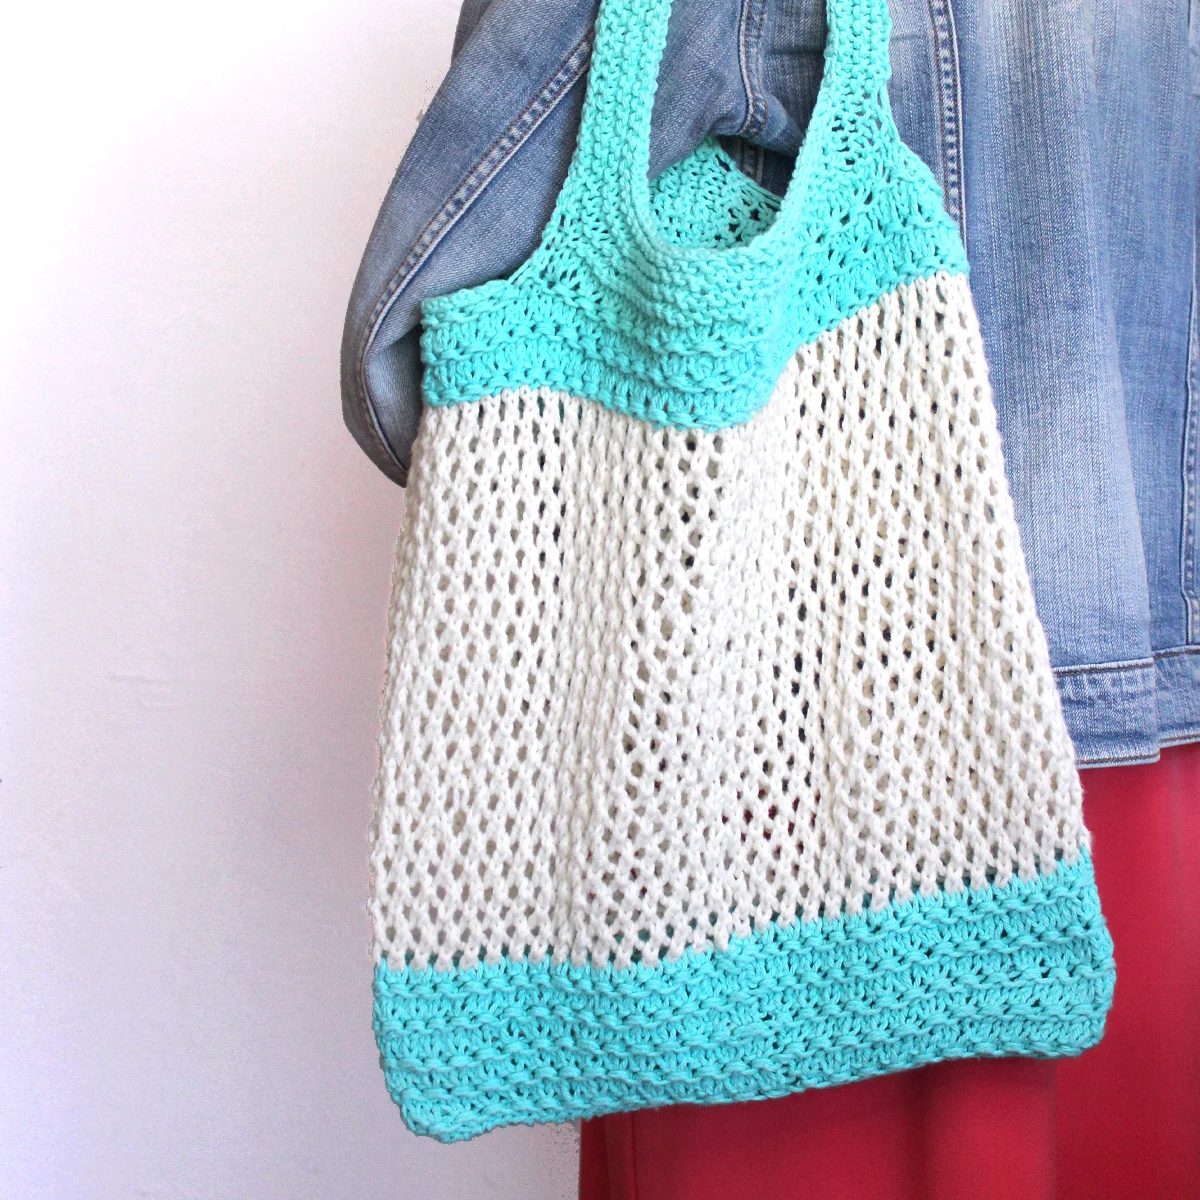 Knitted Bags Patterns Entire Collection | sbis.itti.edu.sa